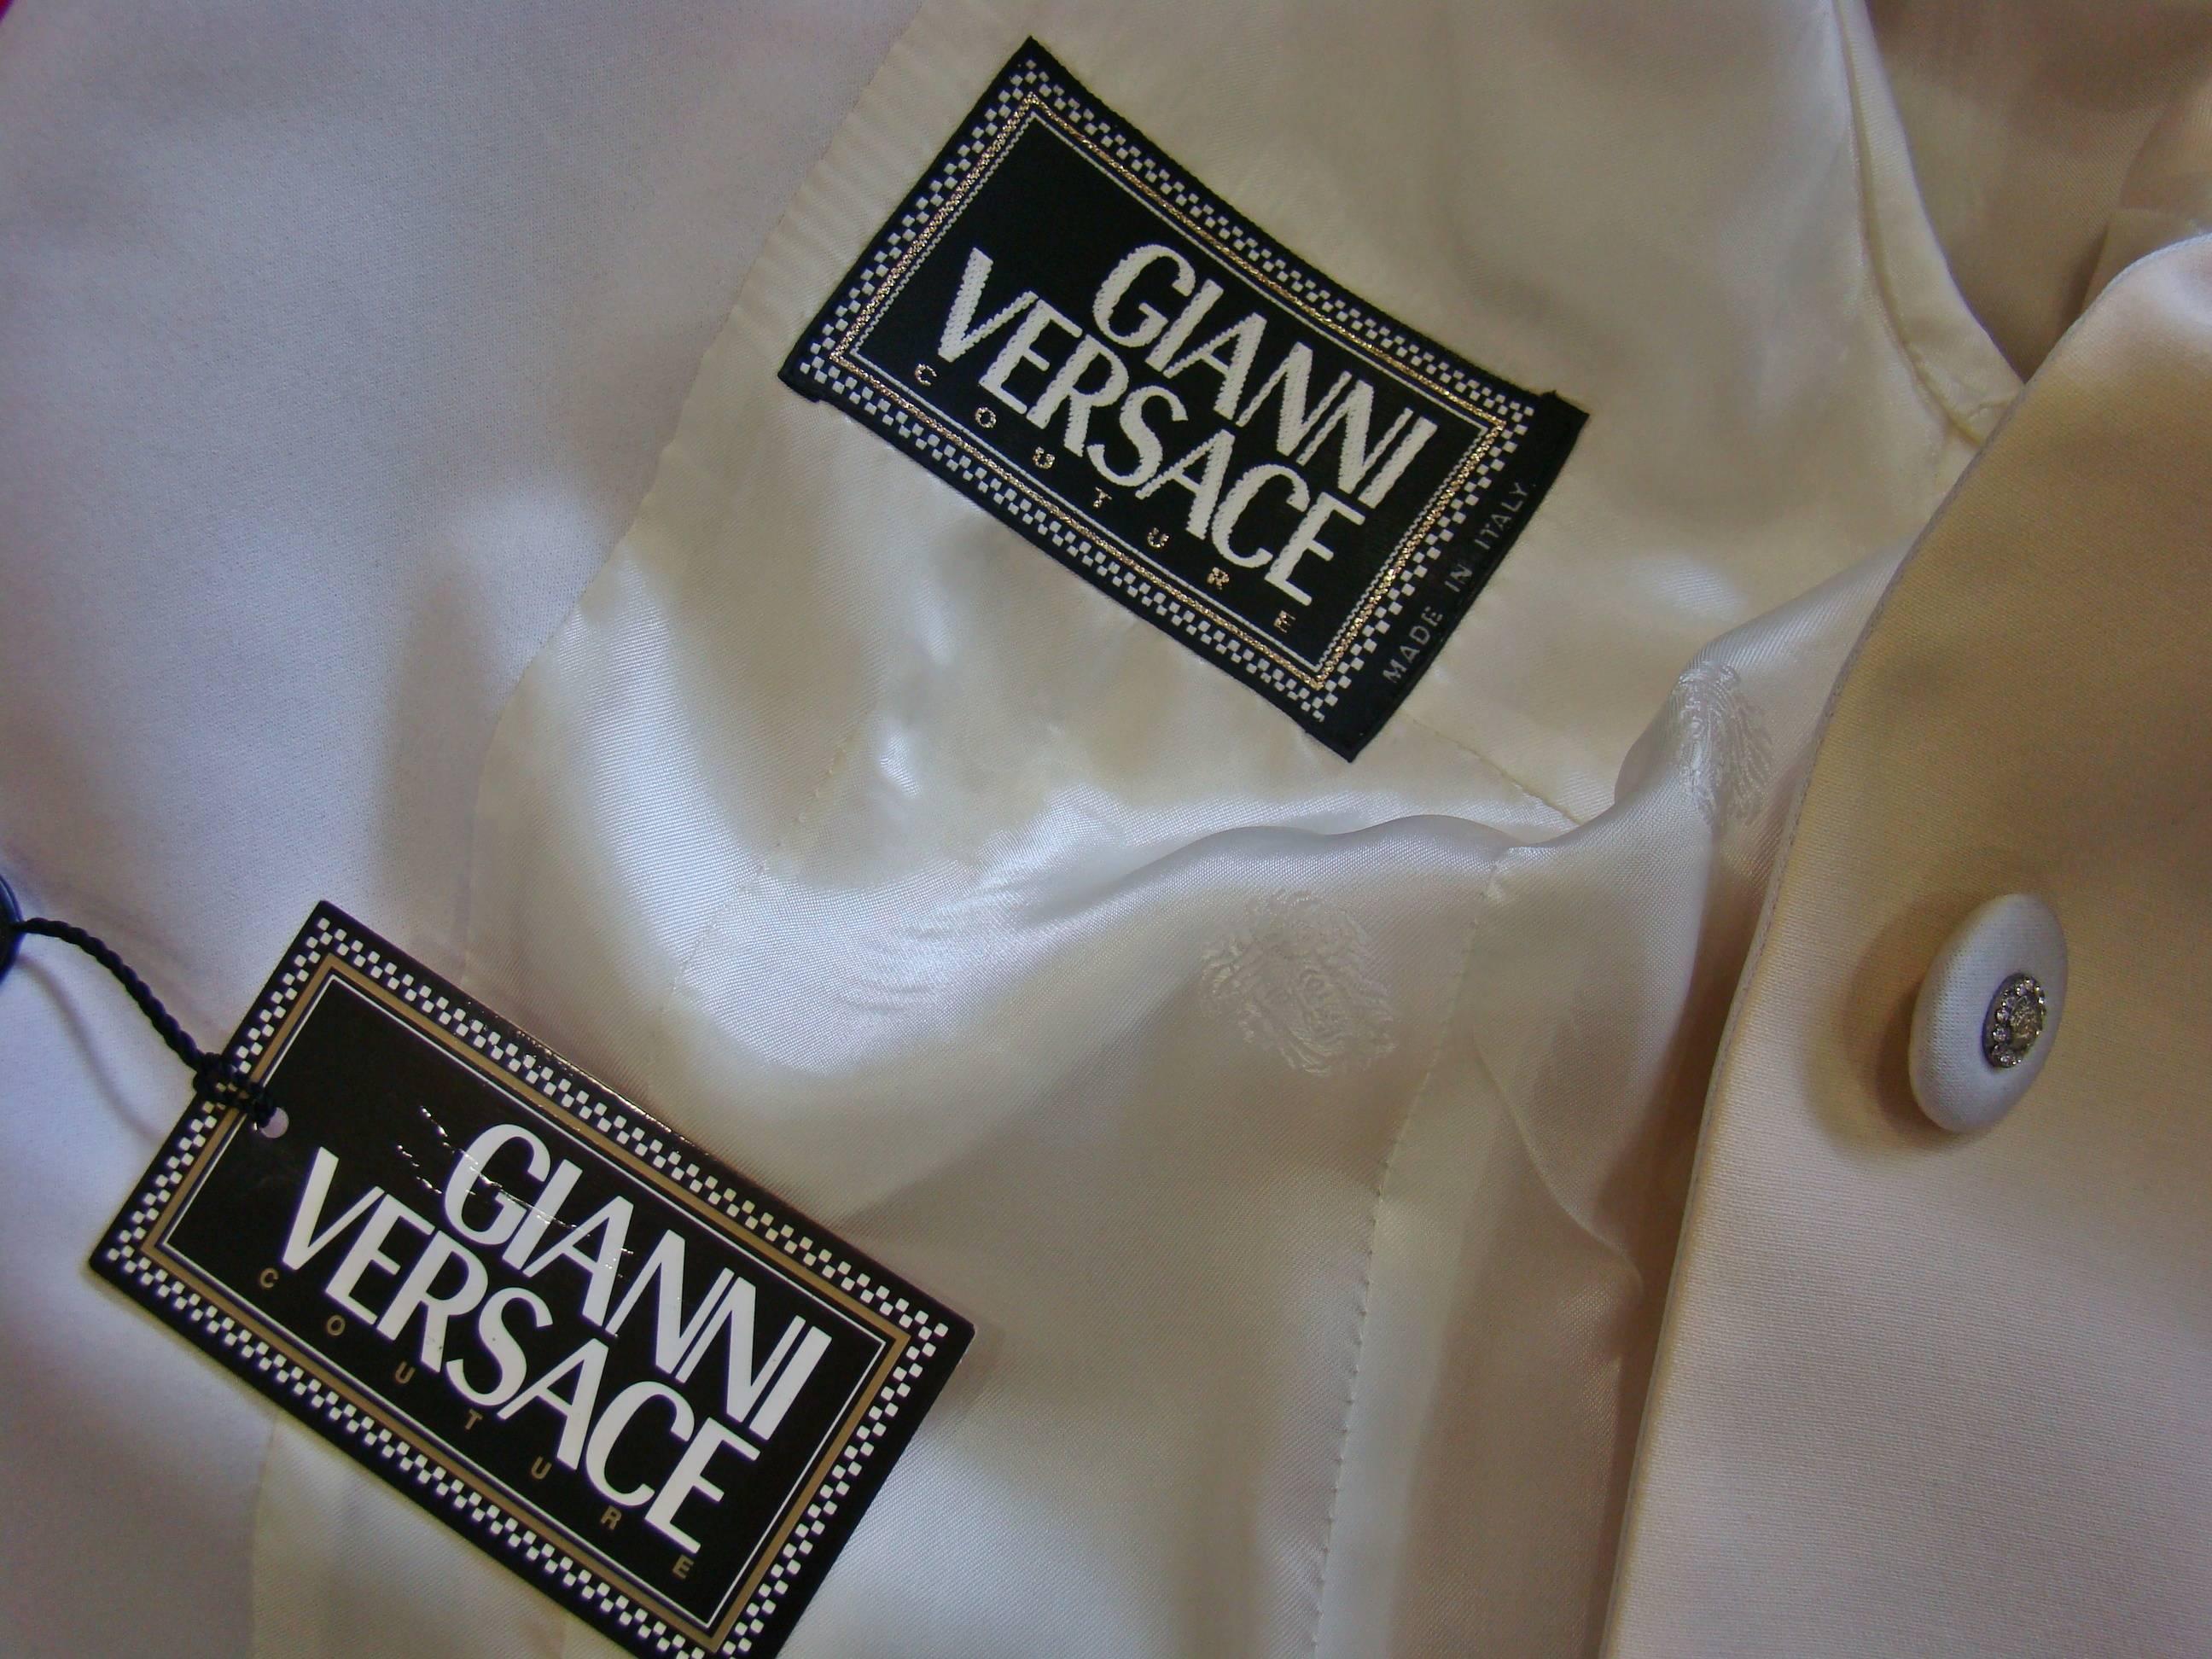 Rare Gianni Versace Couture Tuxedo Jacket Fall 1996 For Sale 1